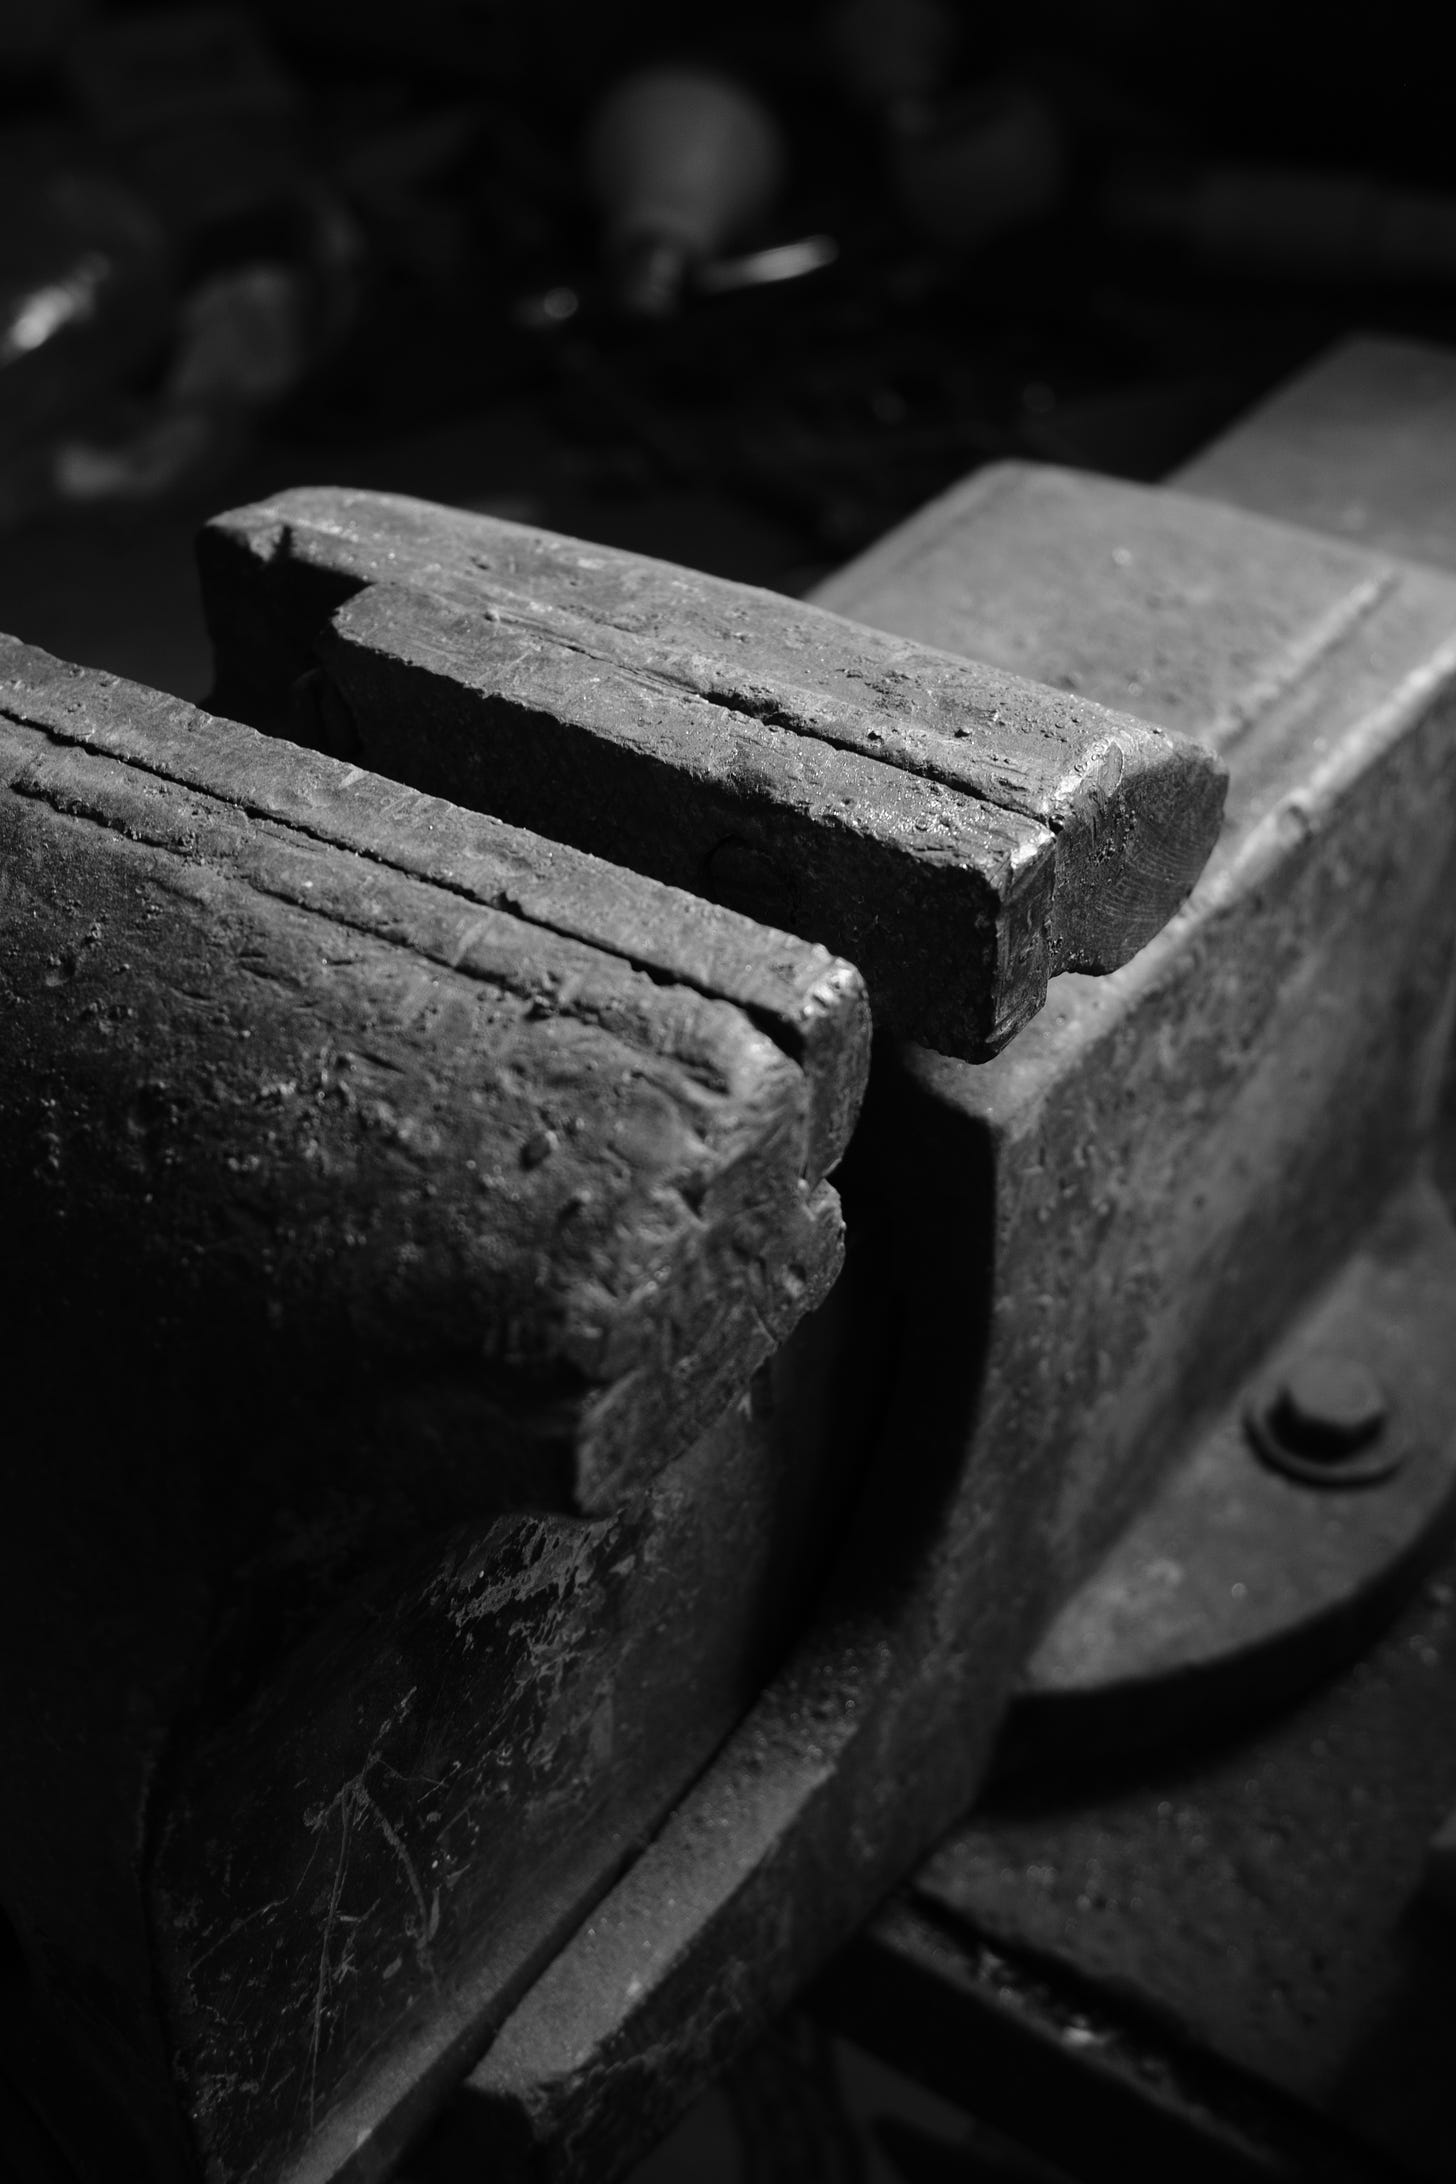 A black and white photo of a metal vise with a piece of wood in between.